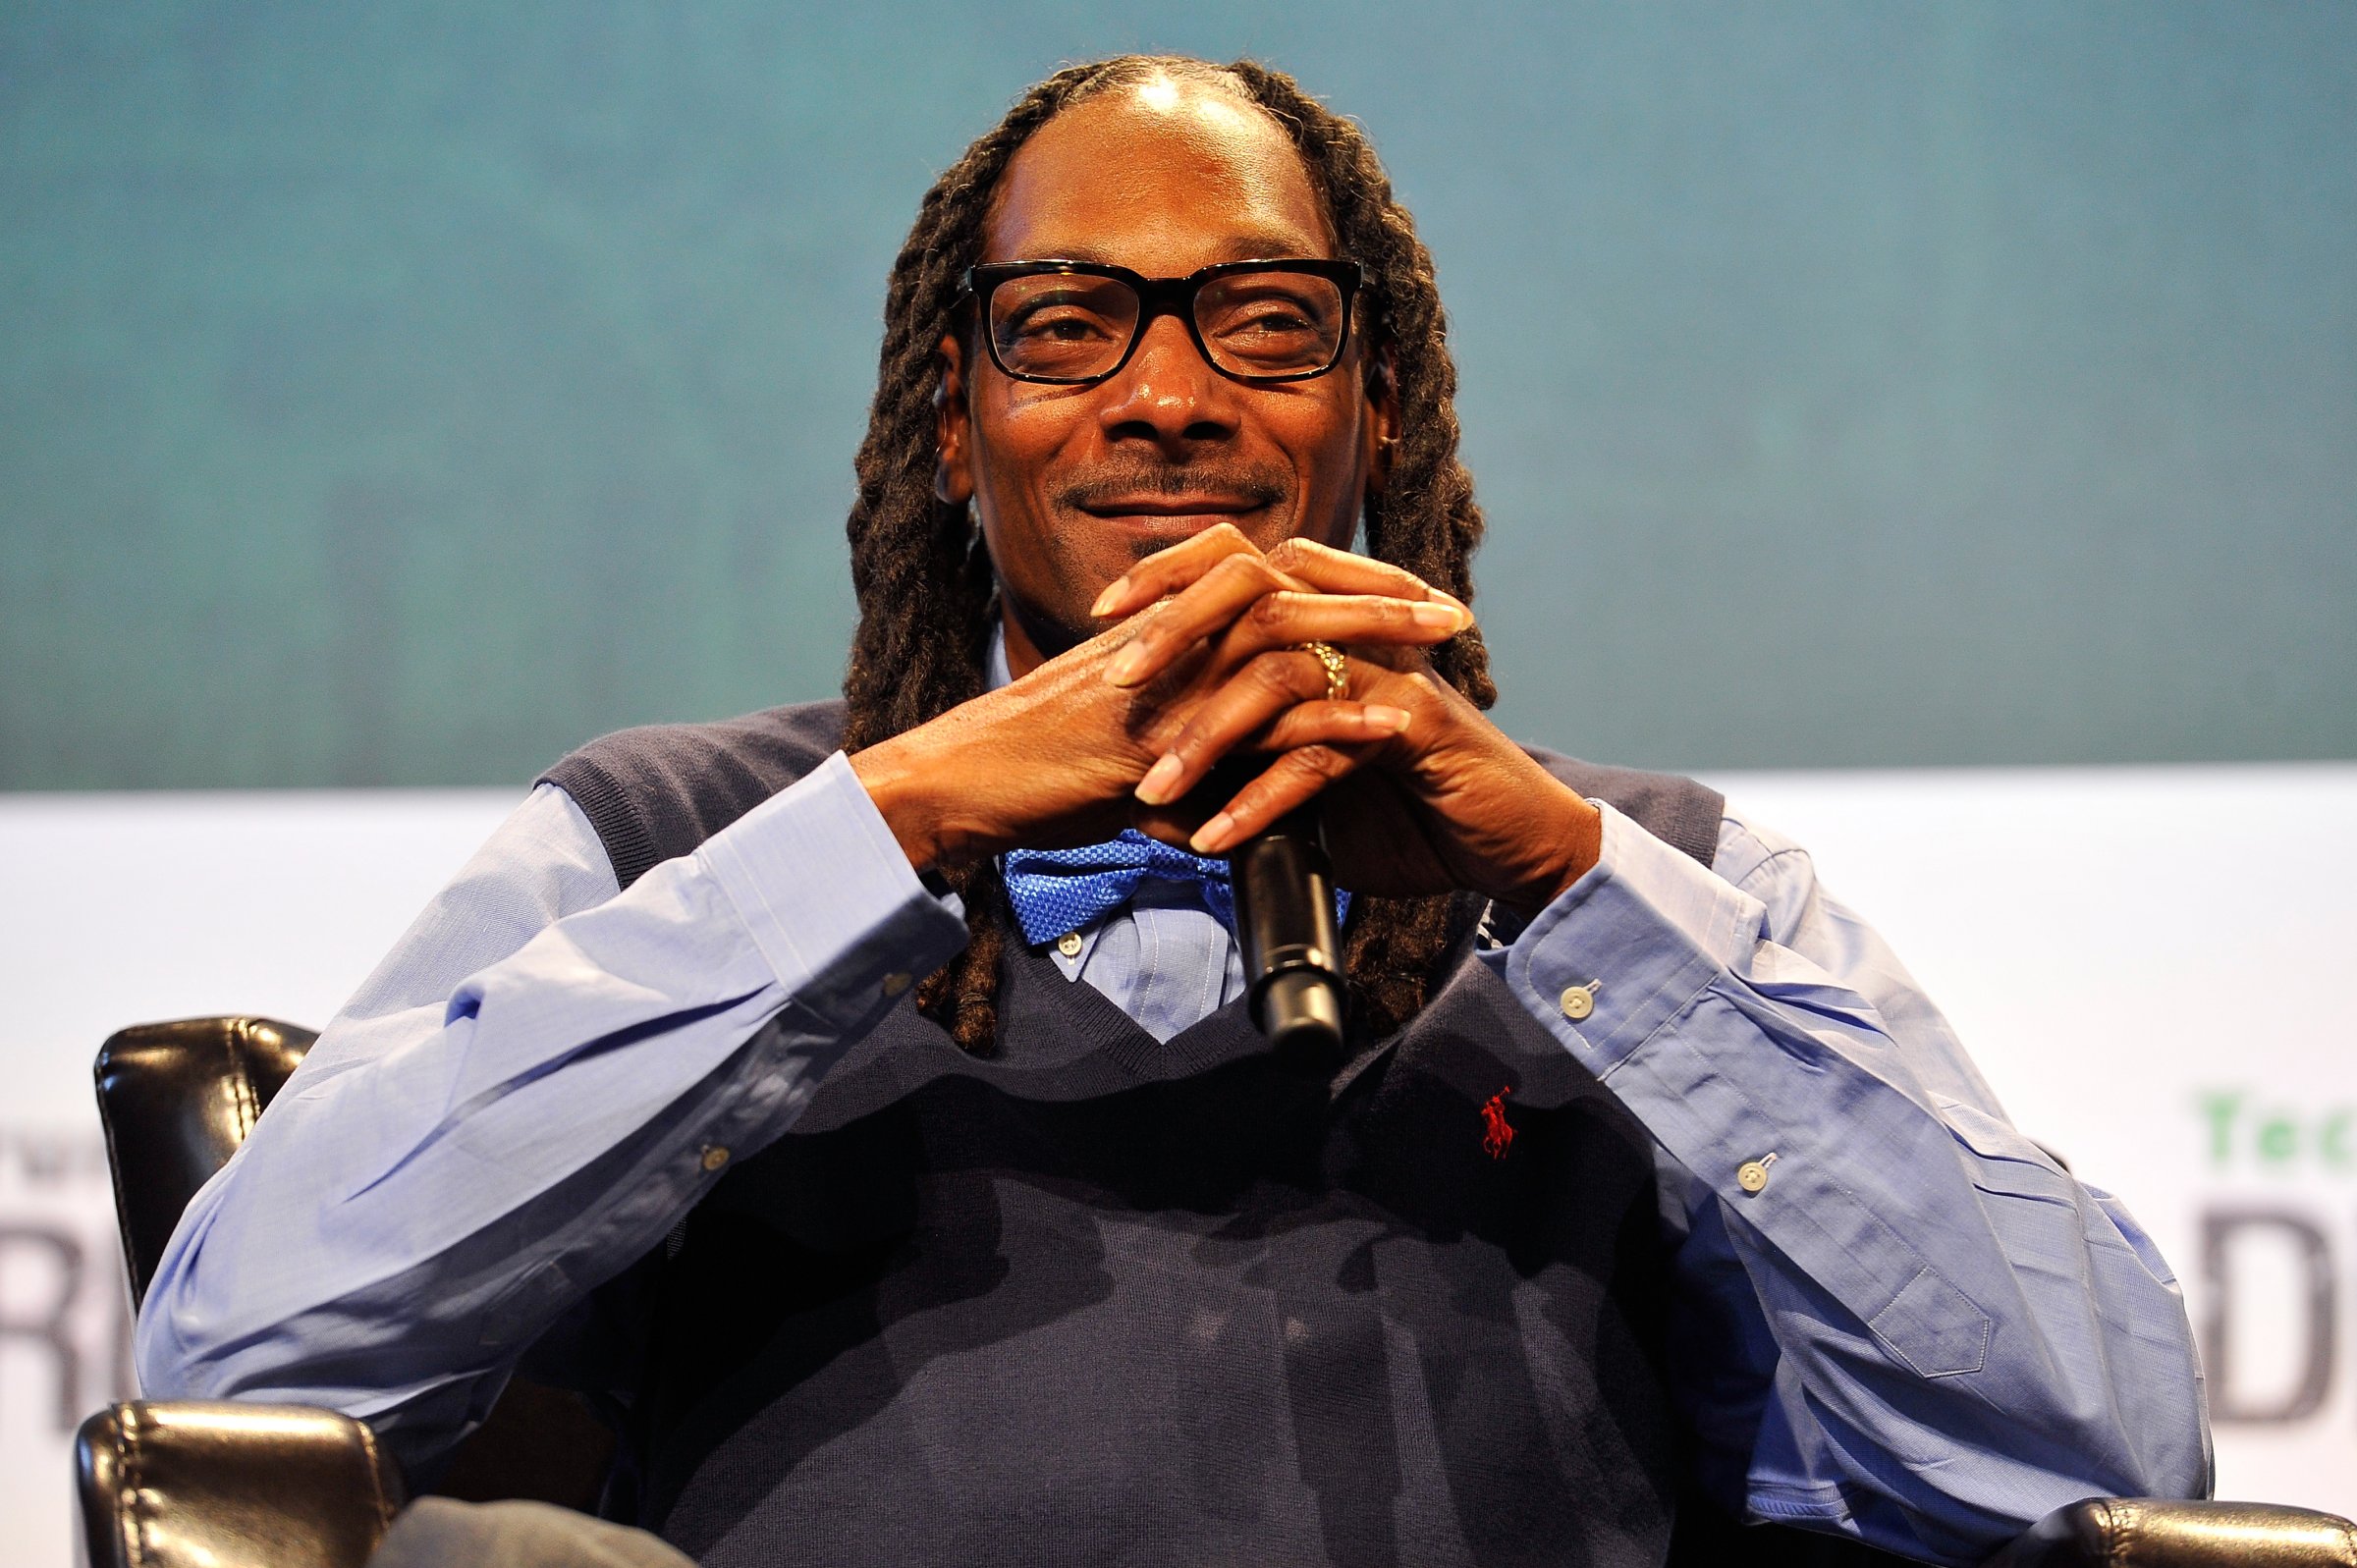 Snoop Dogg's venture capital firm is leading an investment in a cannabis lab-testing company